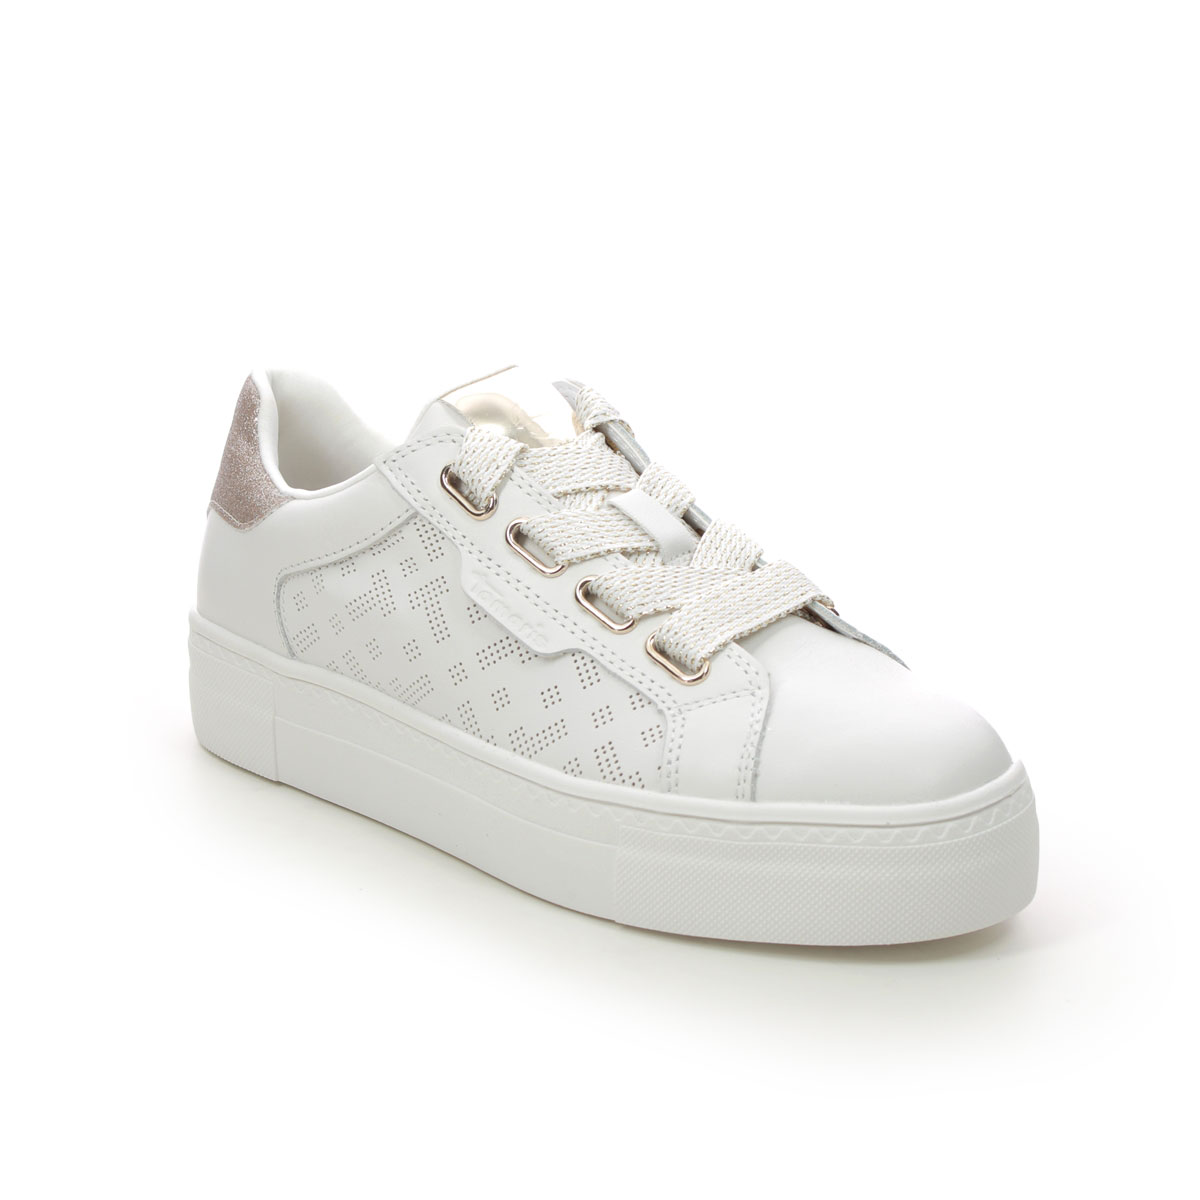 Tamaris Lima White Gold Womens Trainers 23707-20-190 In Size 36 In Plain White Gold